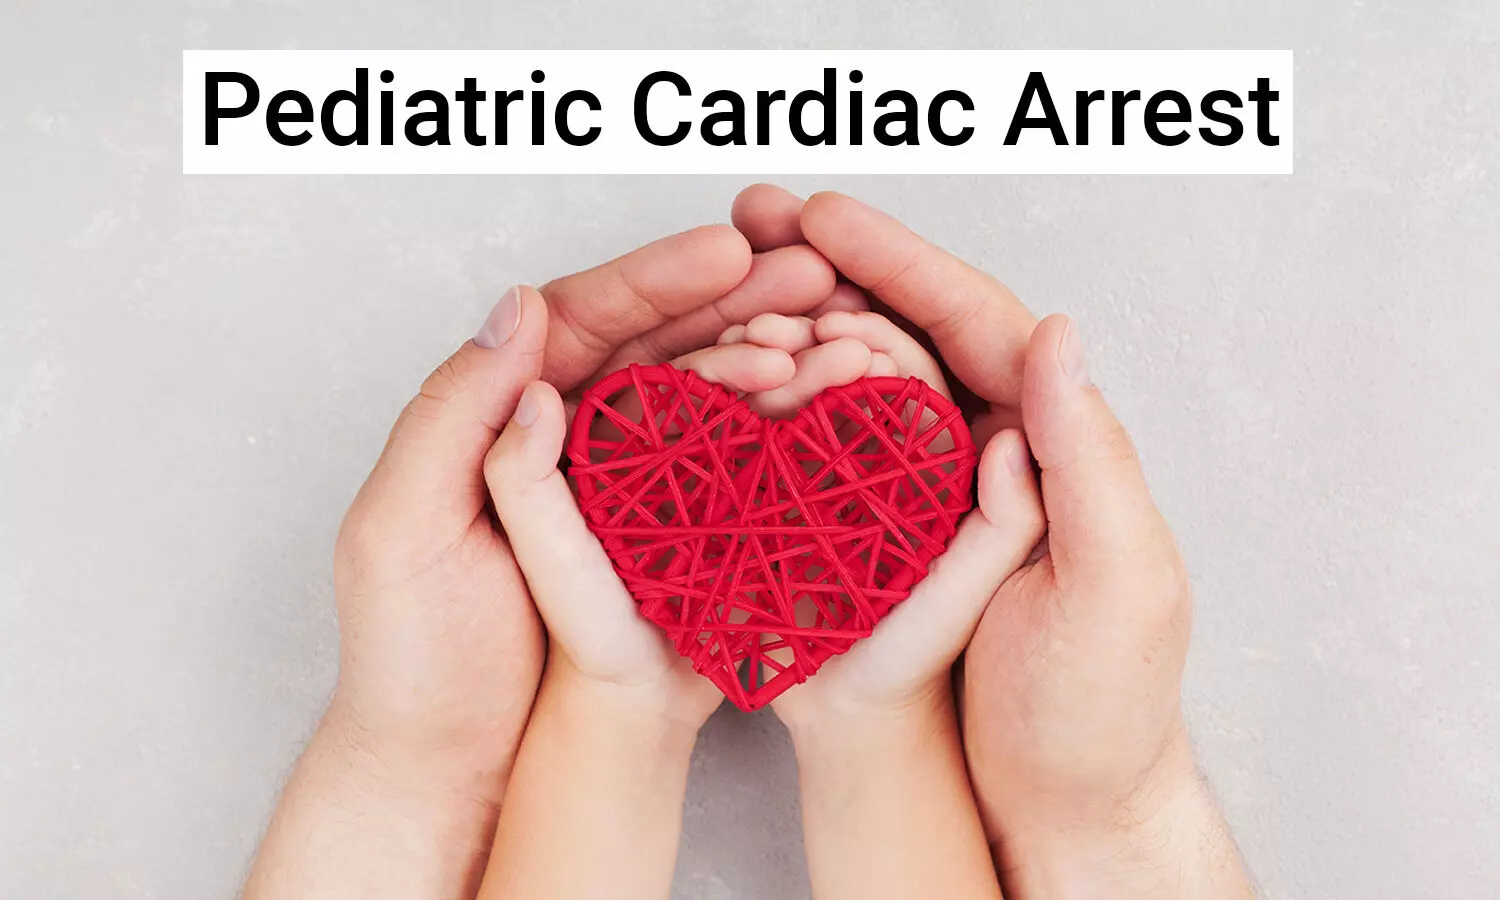 For pediatric in-hospital cardiac arrest which is better-Lidocaine or amiodarone